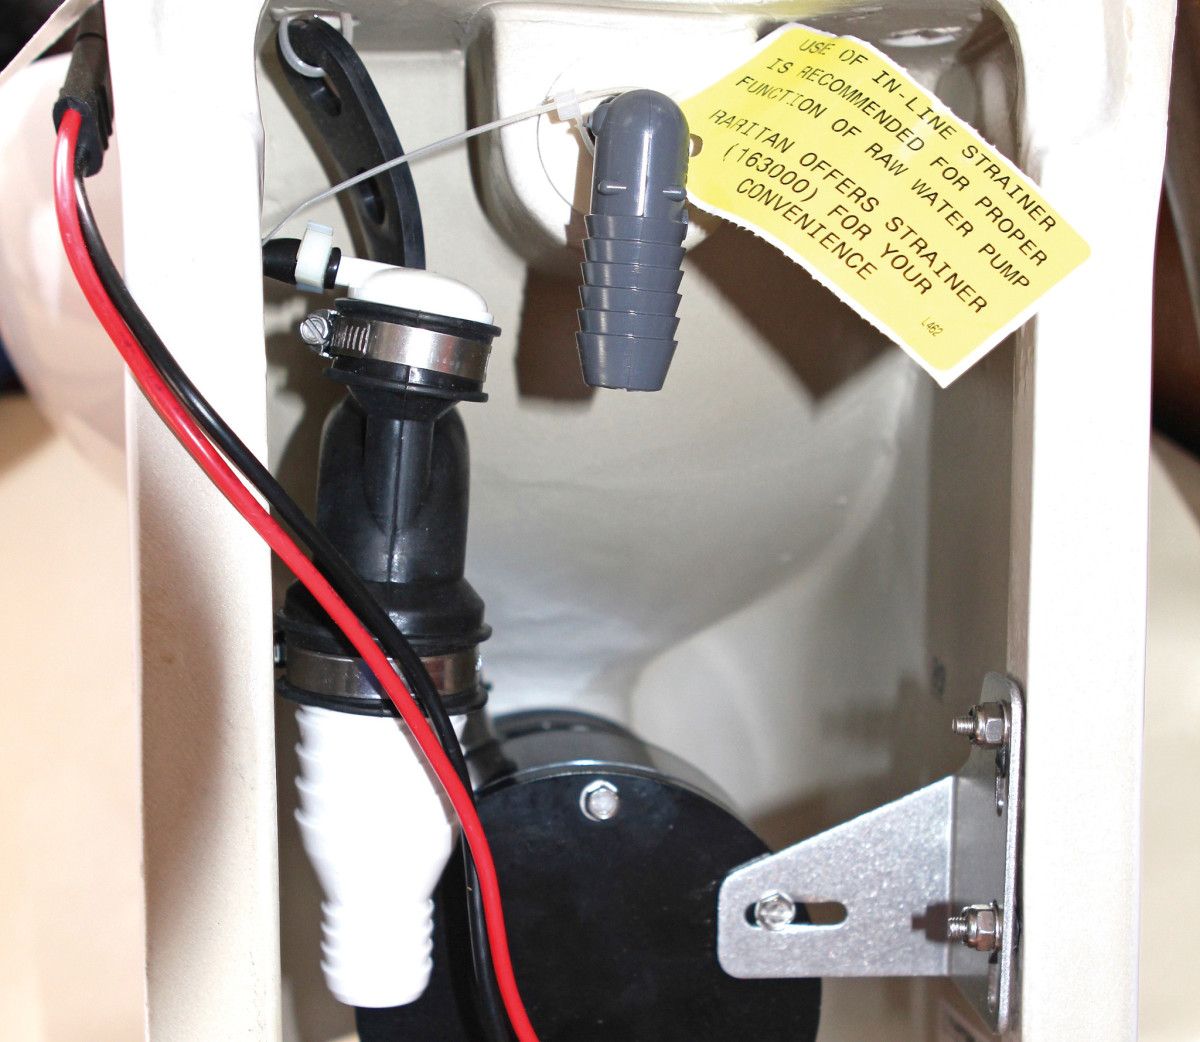 The guts of the toilet were simple enough, with the macerator pump under the bowl